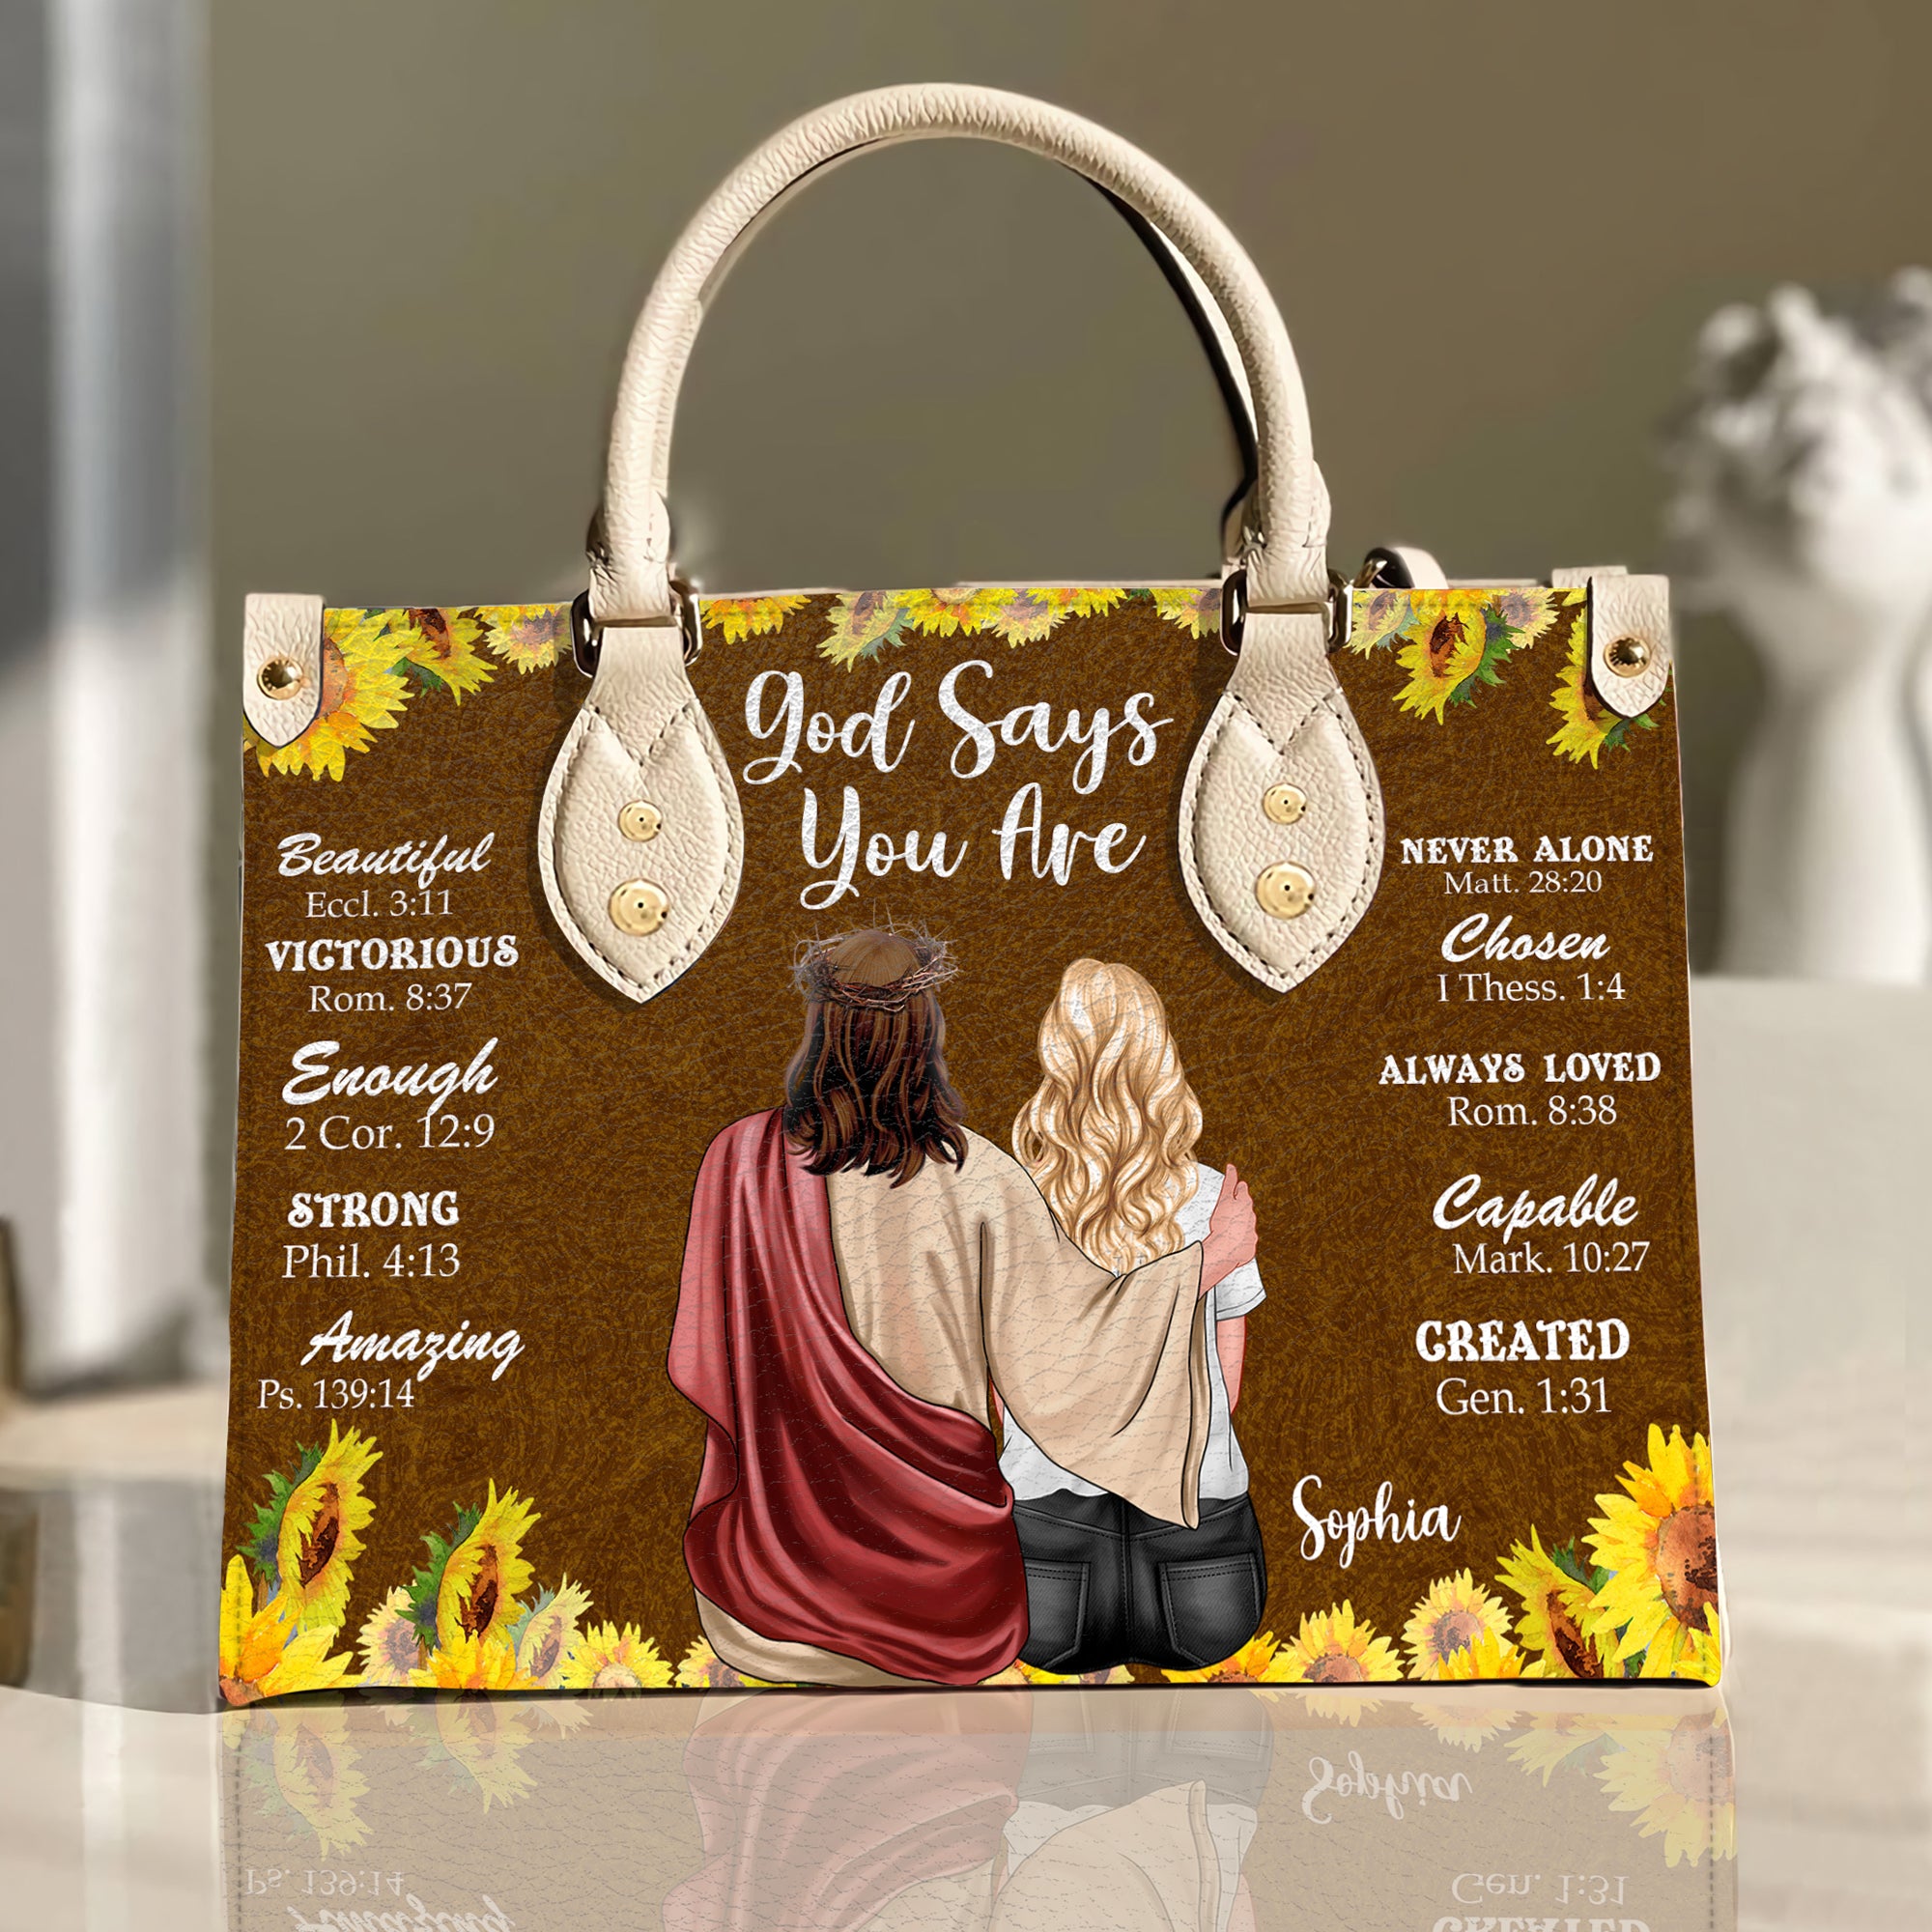 God Says You Are, Personalized Leather Bag, Never Alone, Gift For